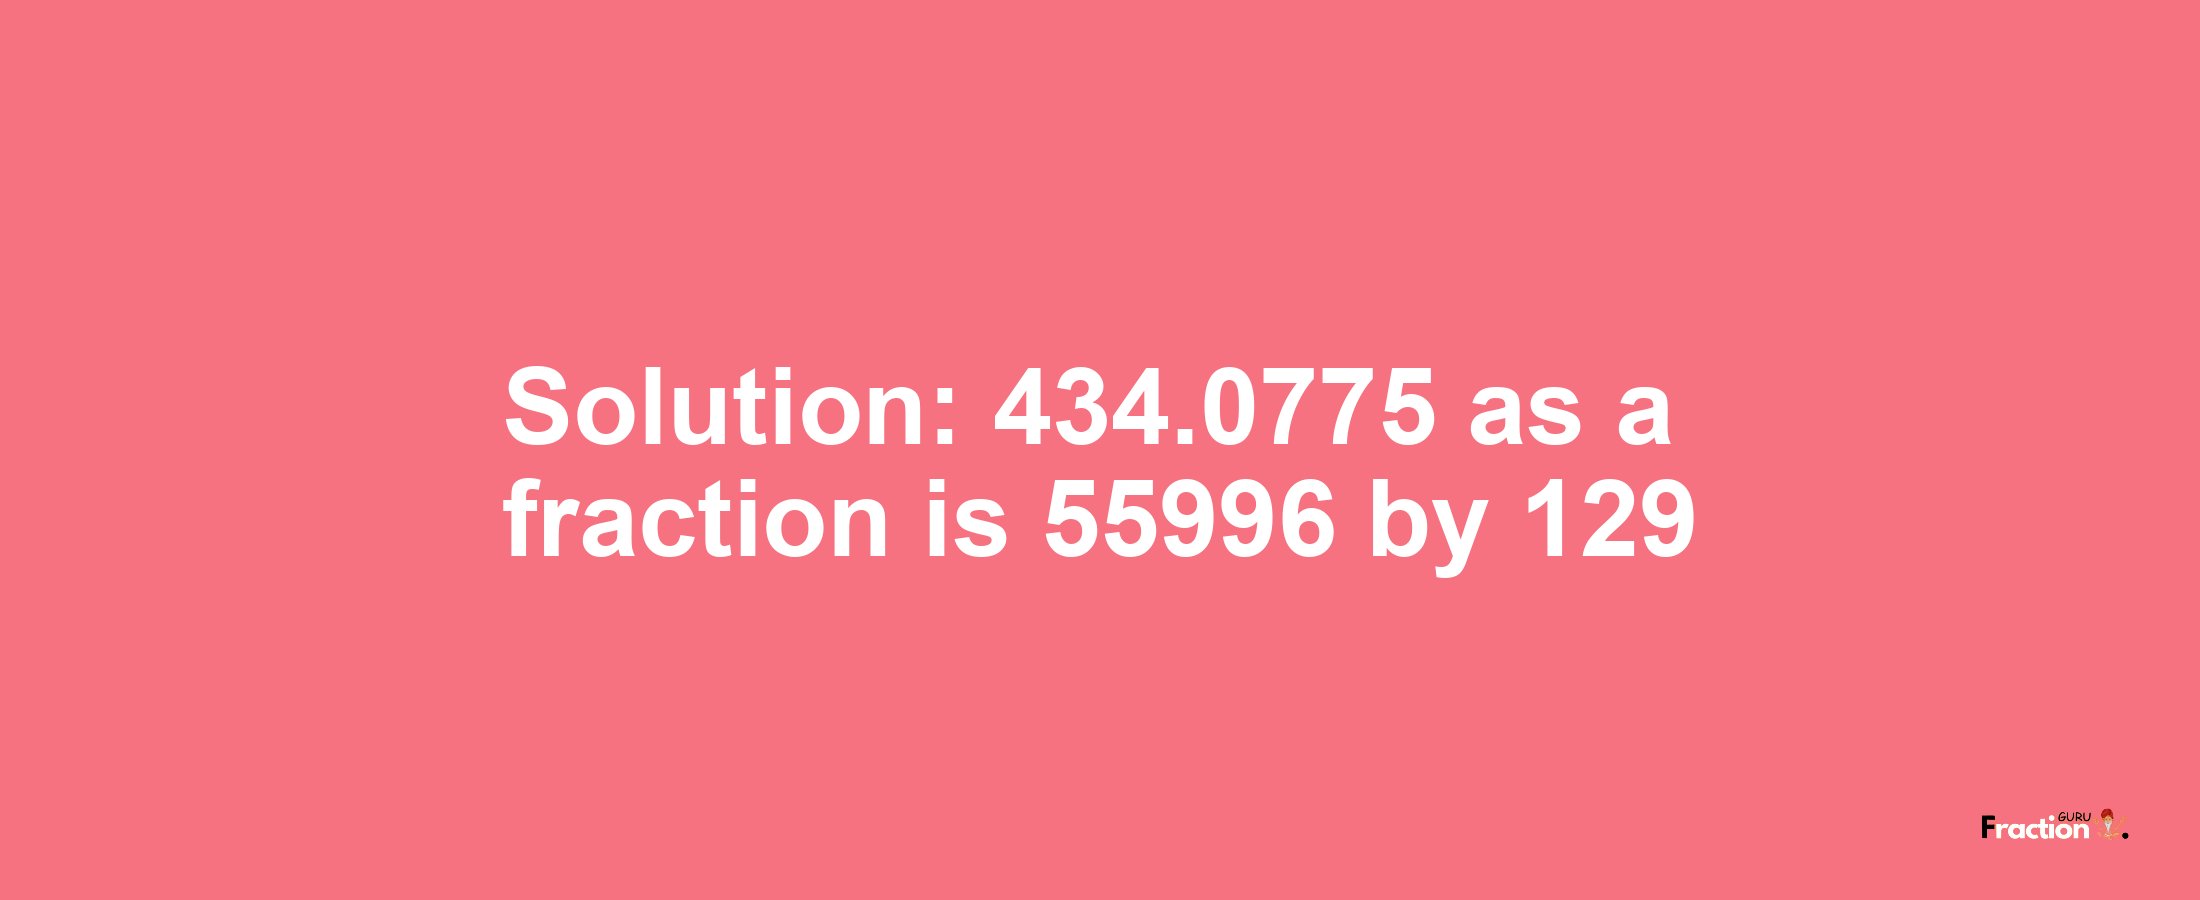 Solution:434.0775 as a fraction is 55996/129